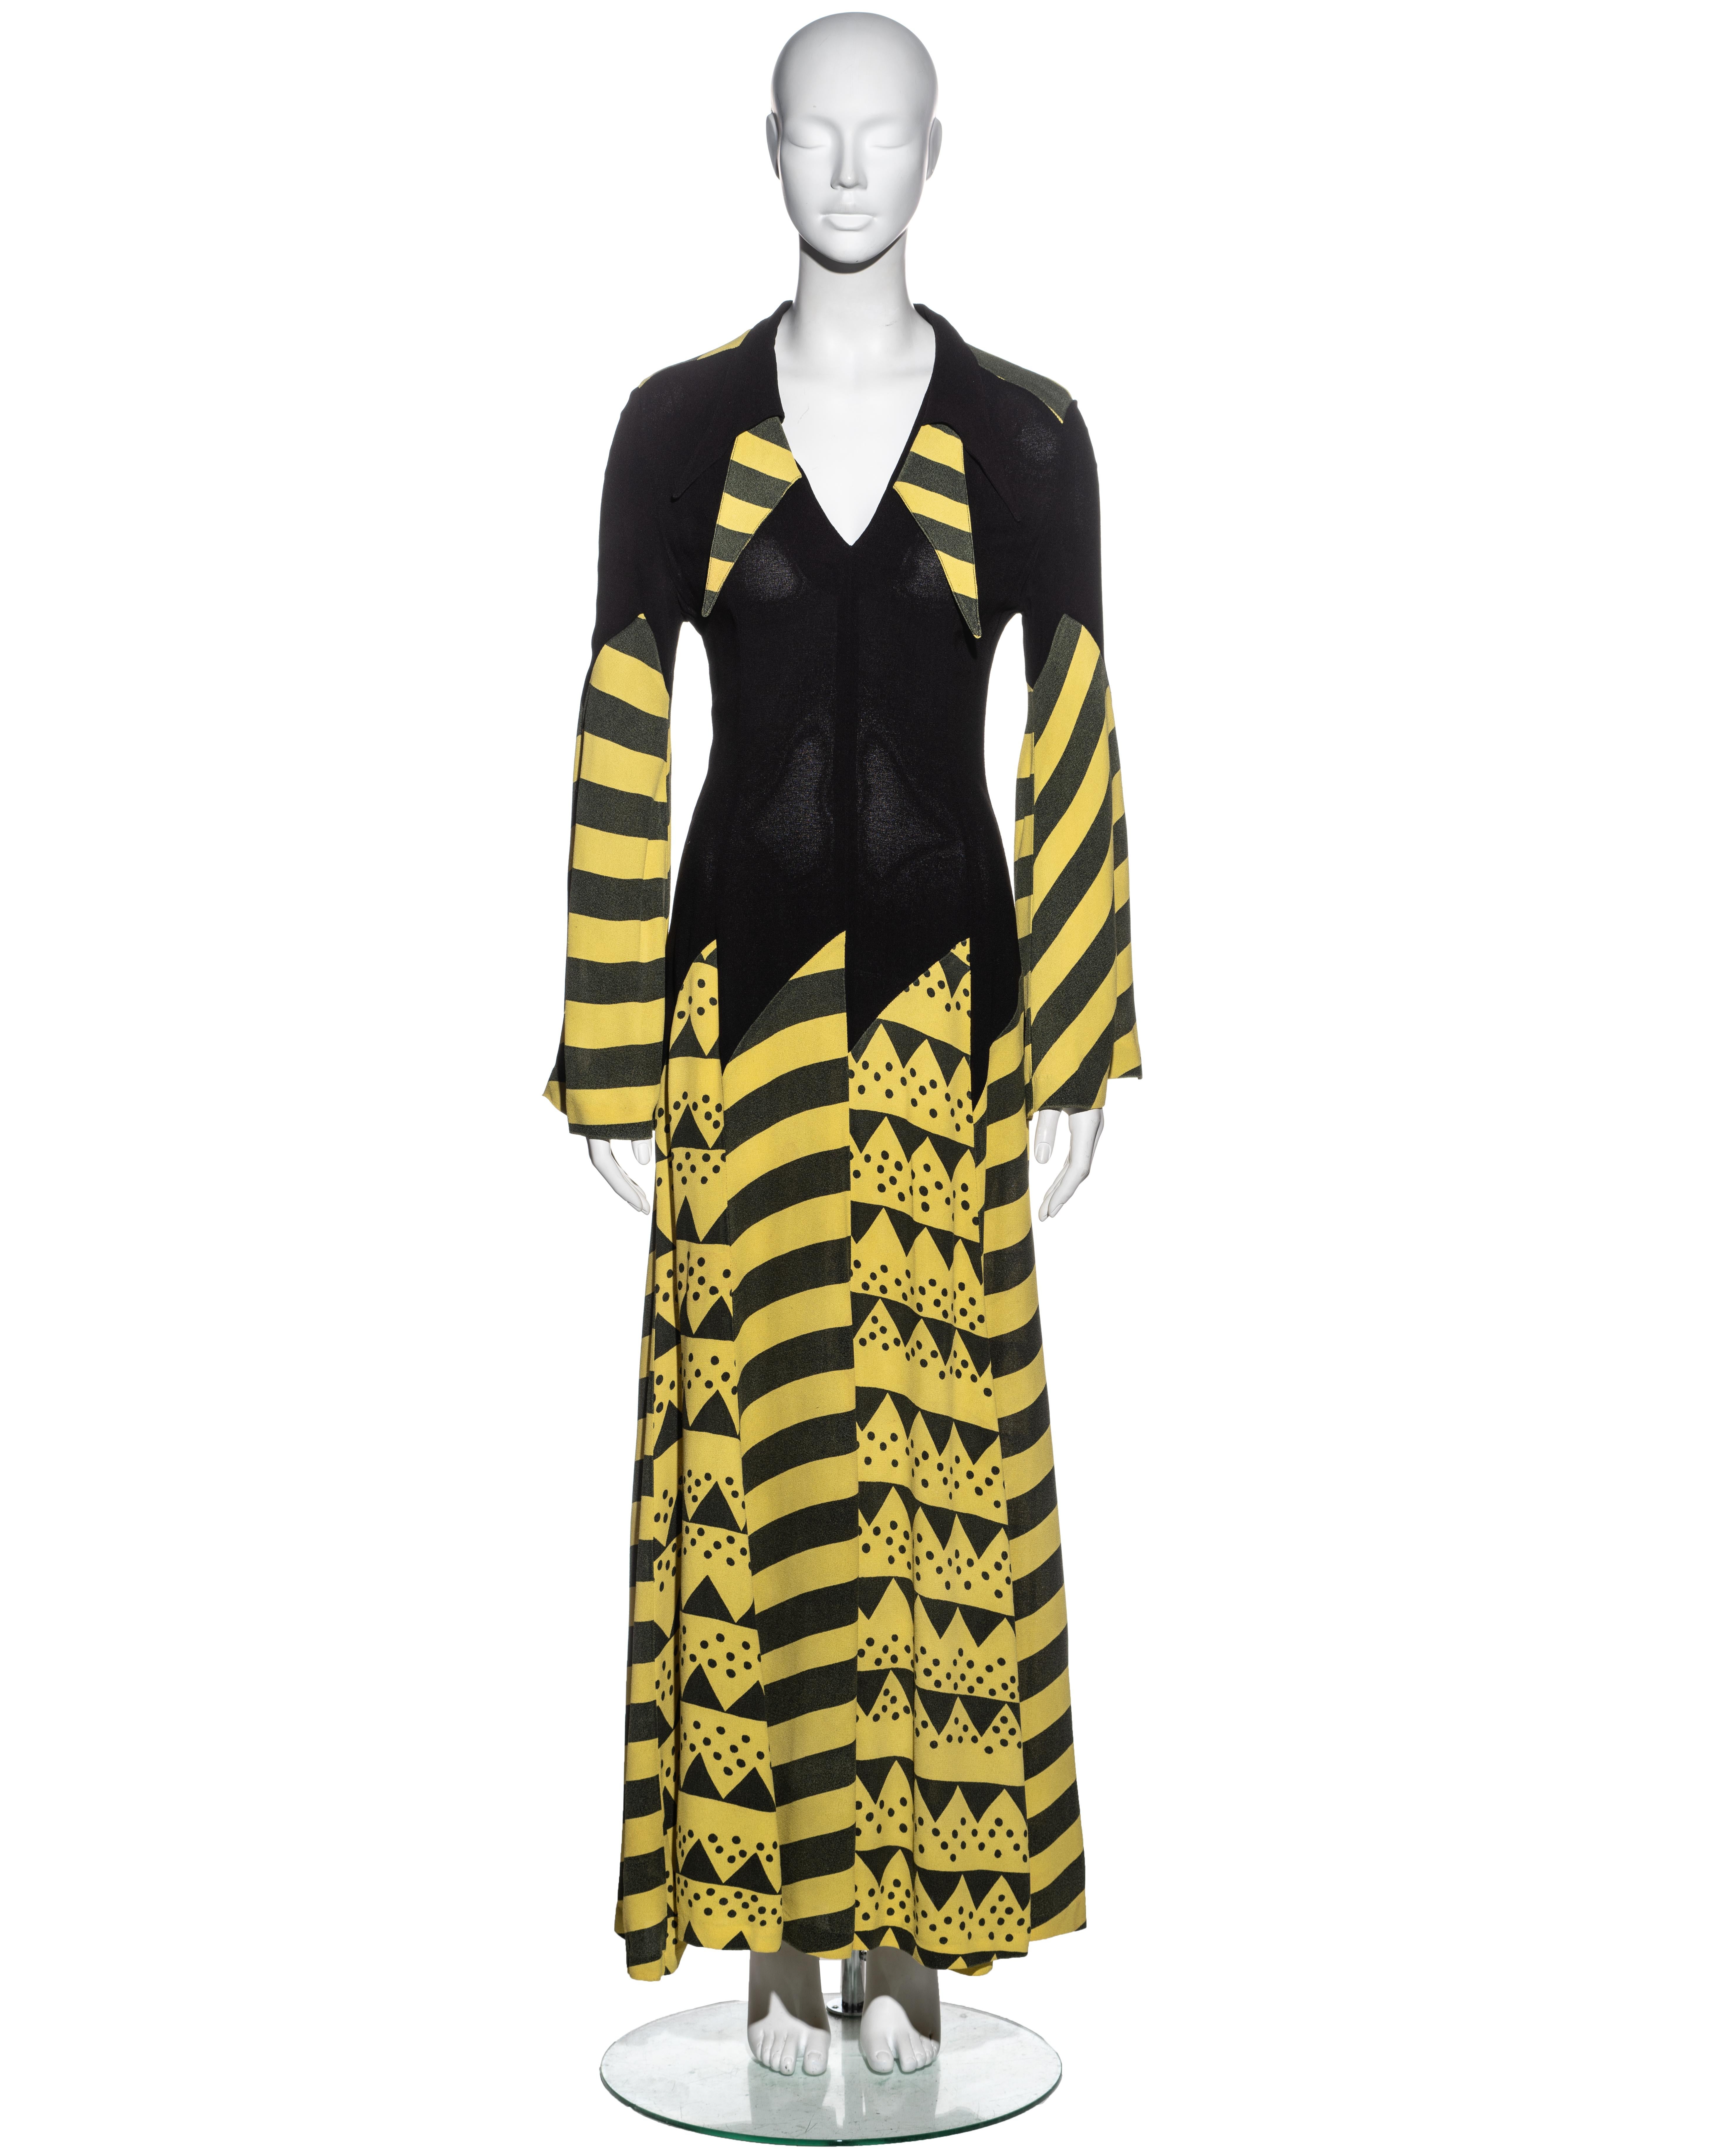 ▪ Ossie Clark black and yellow moss crepe maxi dress
▪ Print by Celia Birtwell 
▪ Trumpet sleeves 
▪ Skirt of multiple panels with pointed edges at hip
▪ Collar with four pointed lapels 
▪ Metal zip fastening at centre-back 
▪ Size Medium
▪